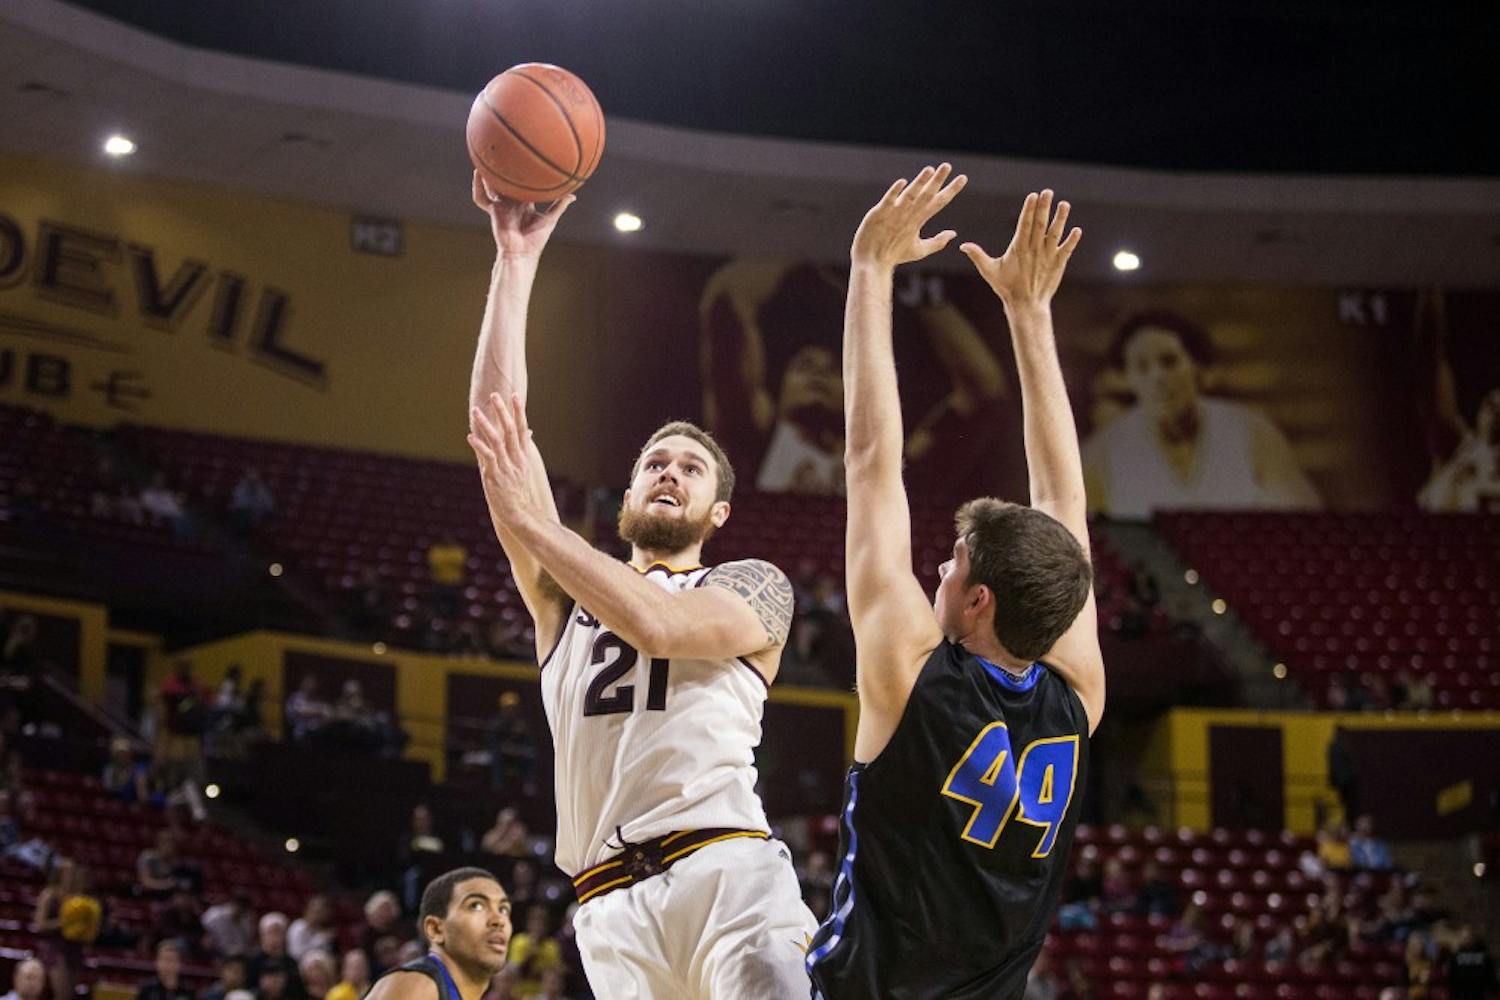 Arizona State Sun Devils forward Eric Jacobsen, left, takes a shot over UCSB forward Sam Beeler during a game against UC Santa Barbara at Wells Fargo Arena in Tempe, Ariz., on Sunday, Nov. 29, 2015. The ASU Sun Devils took down the UC Santa Barbara Gauchos, 70-68.